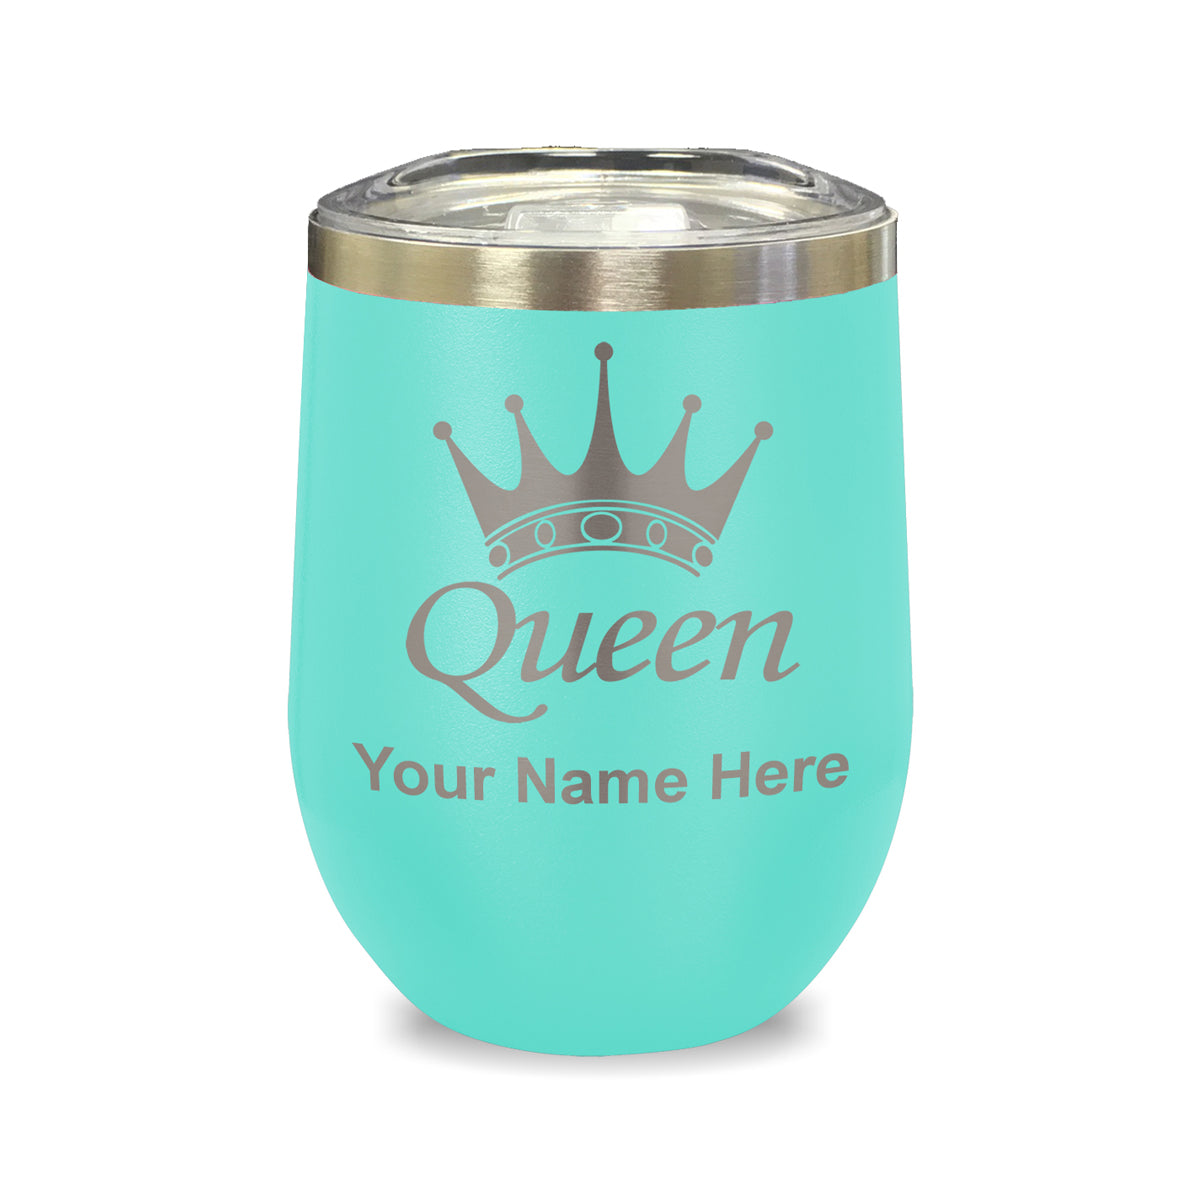 LaserGram Double Wall Stainless Steel Wine Glass, Queen Crown, Personalized Engraving Included